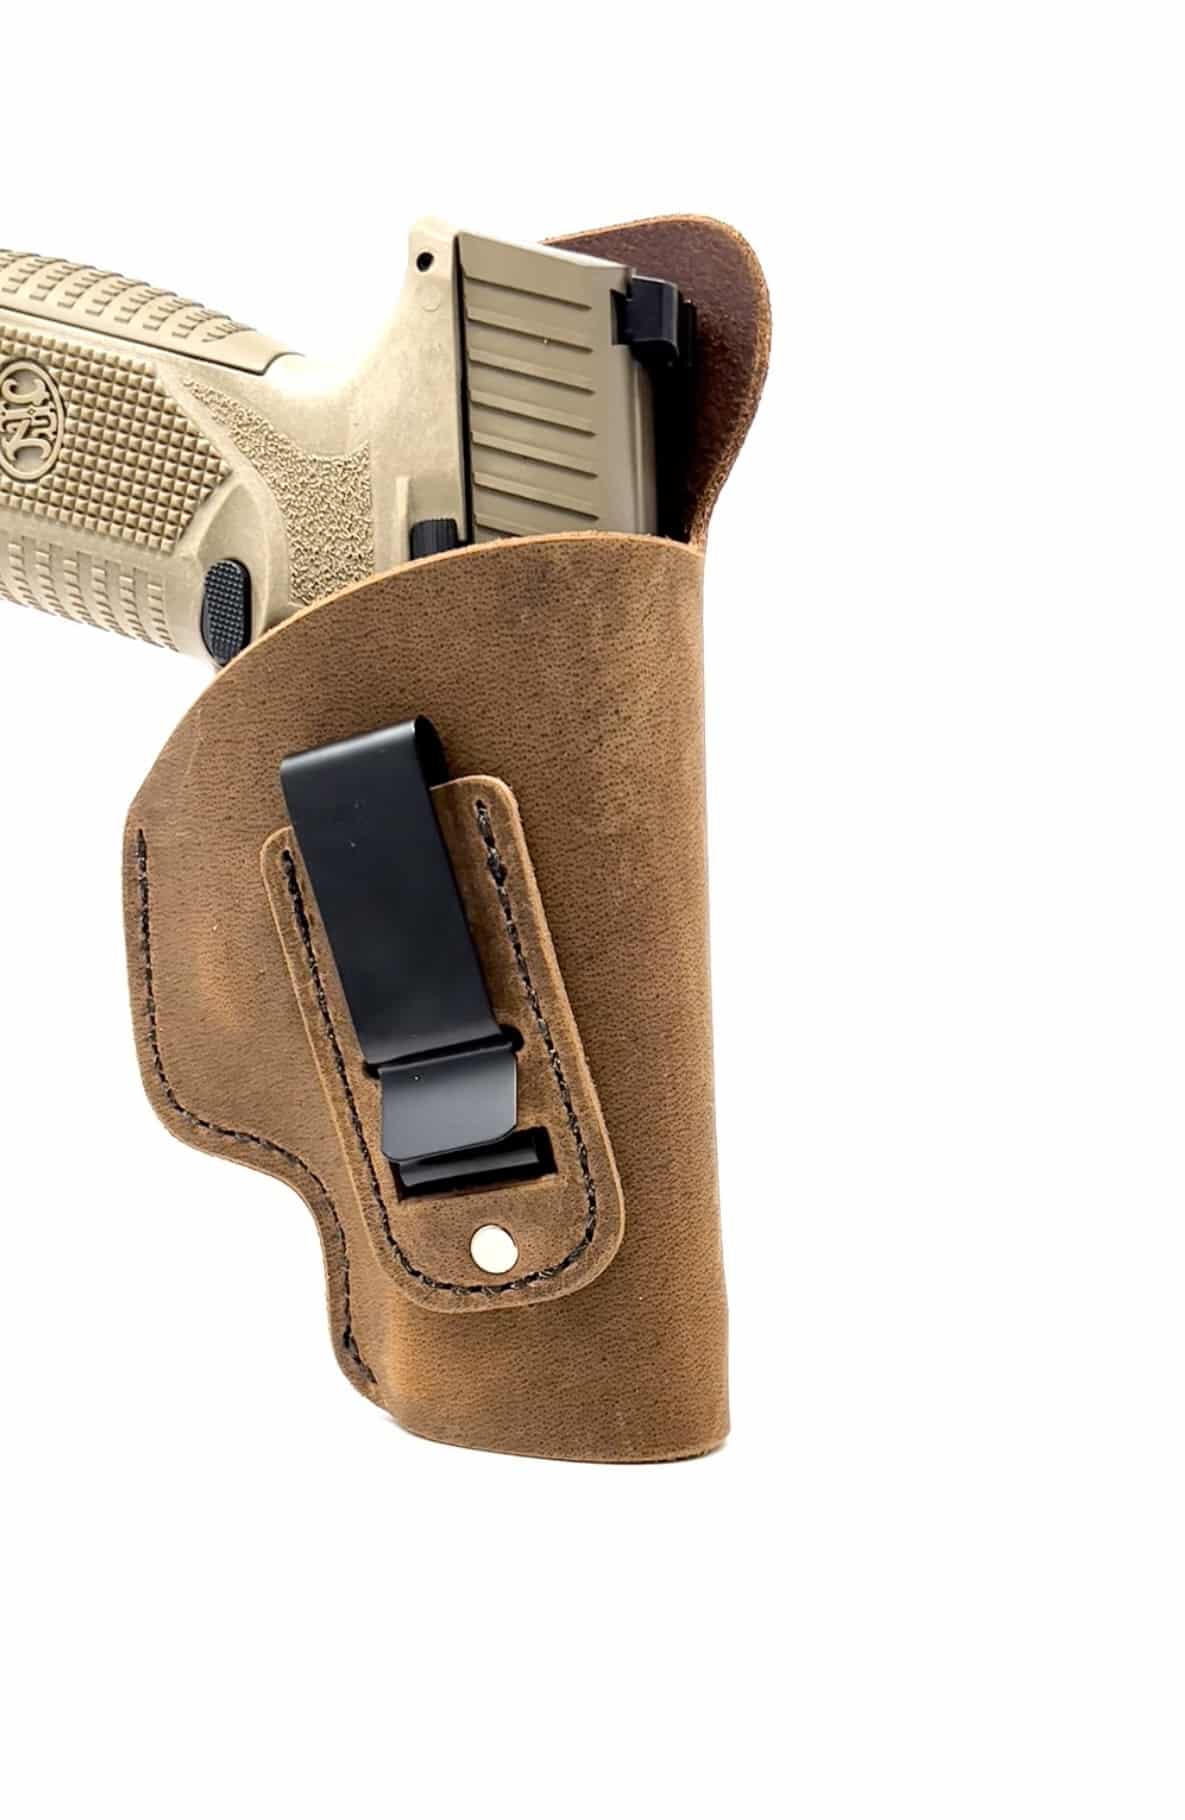 Details about   Leather IWB Inside the Waistband Holster for Glock 37 Made in the USA 